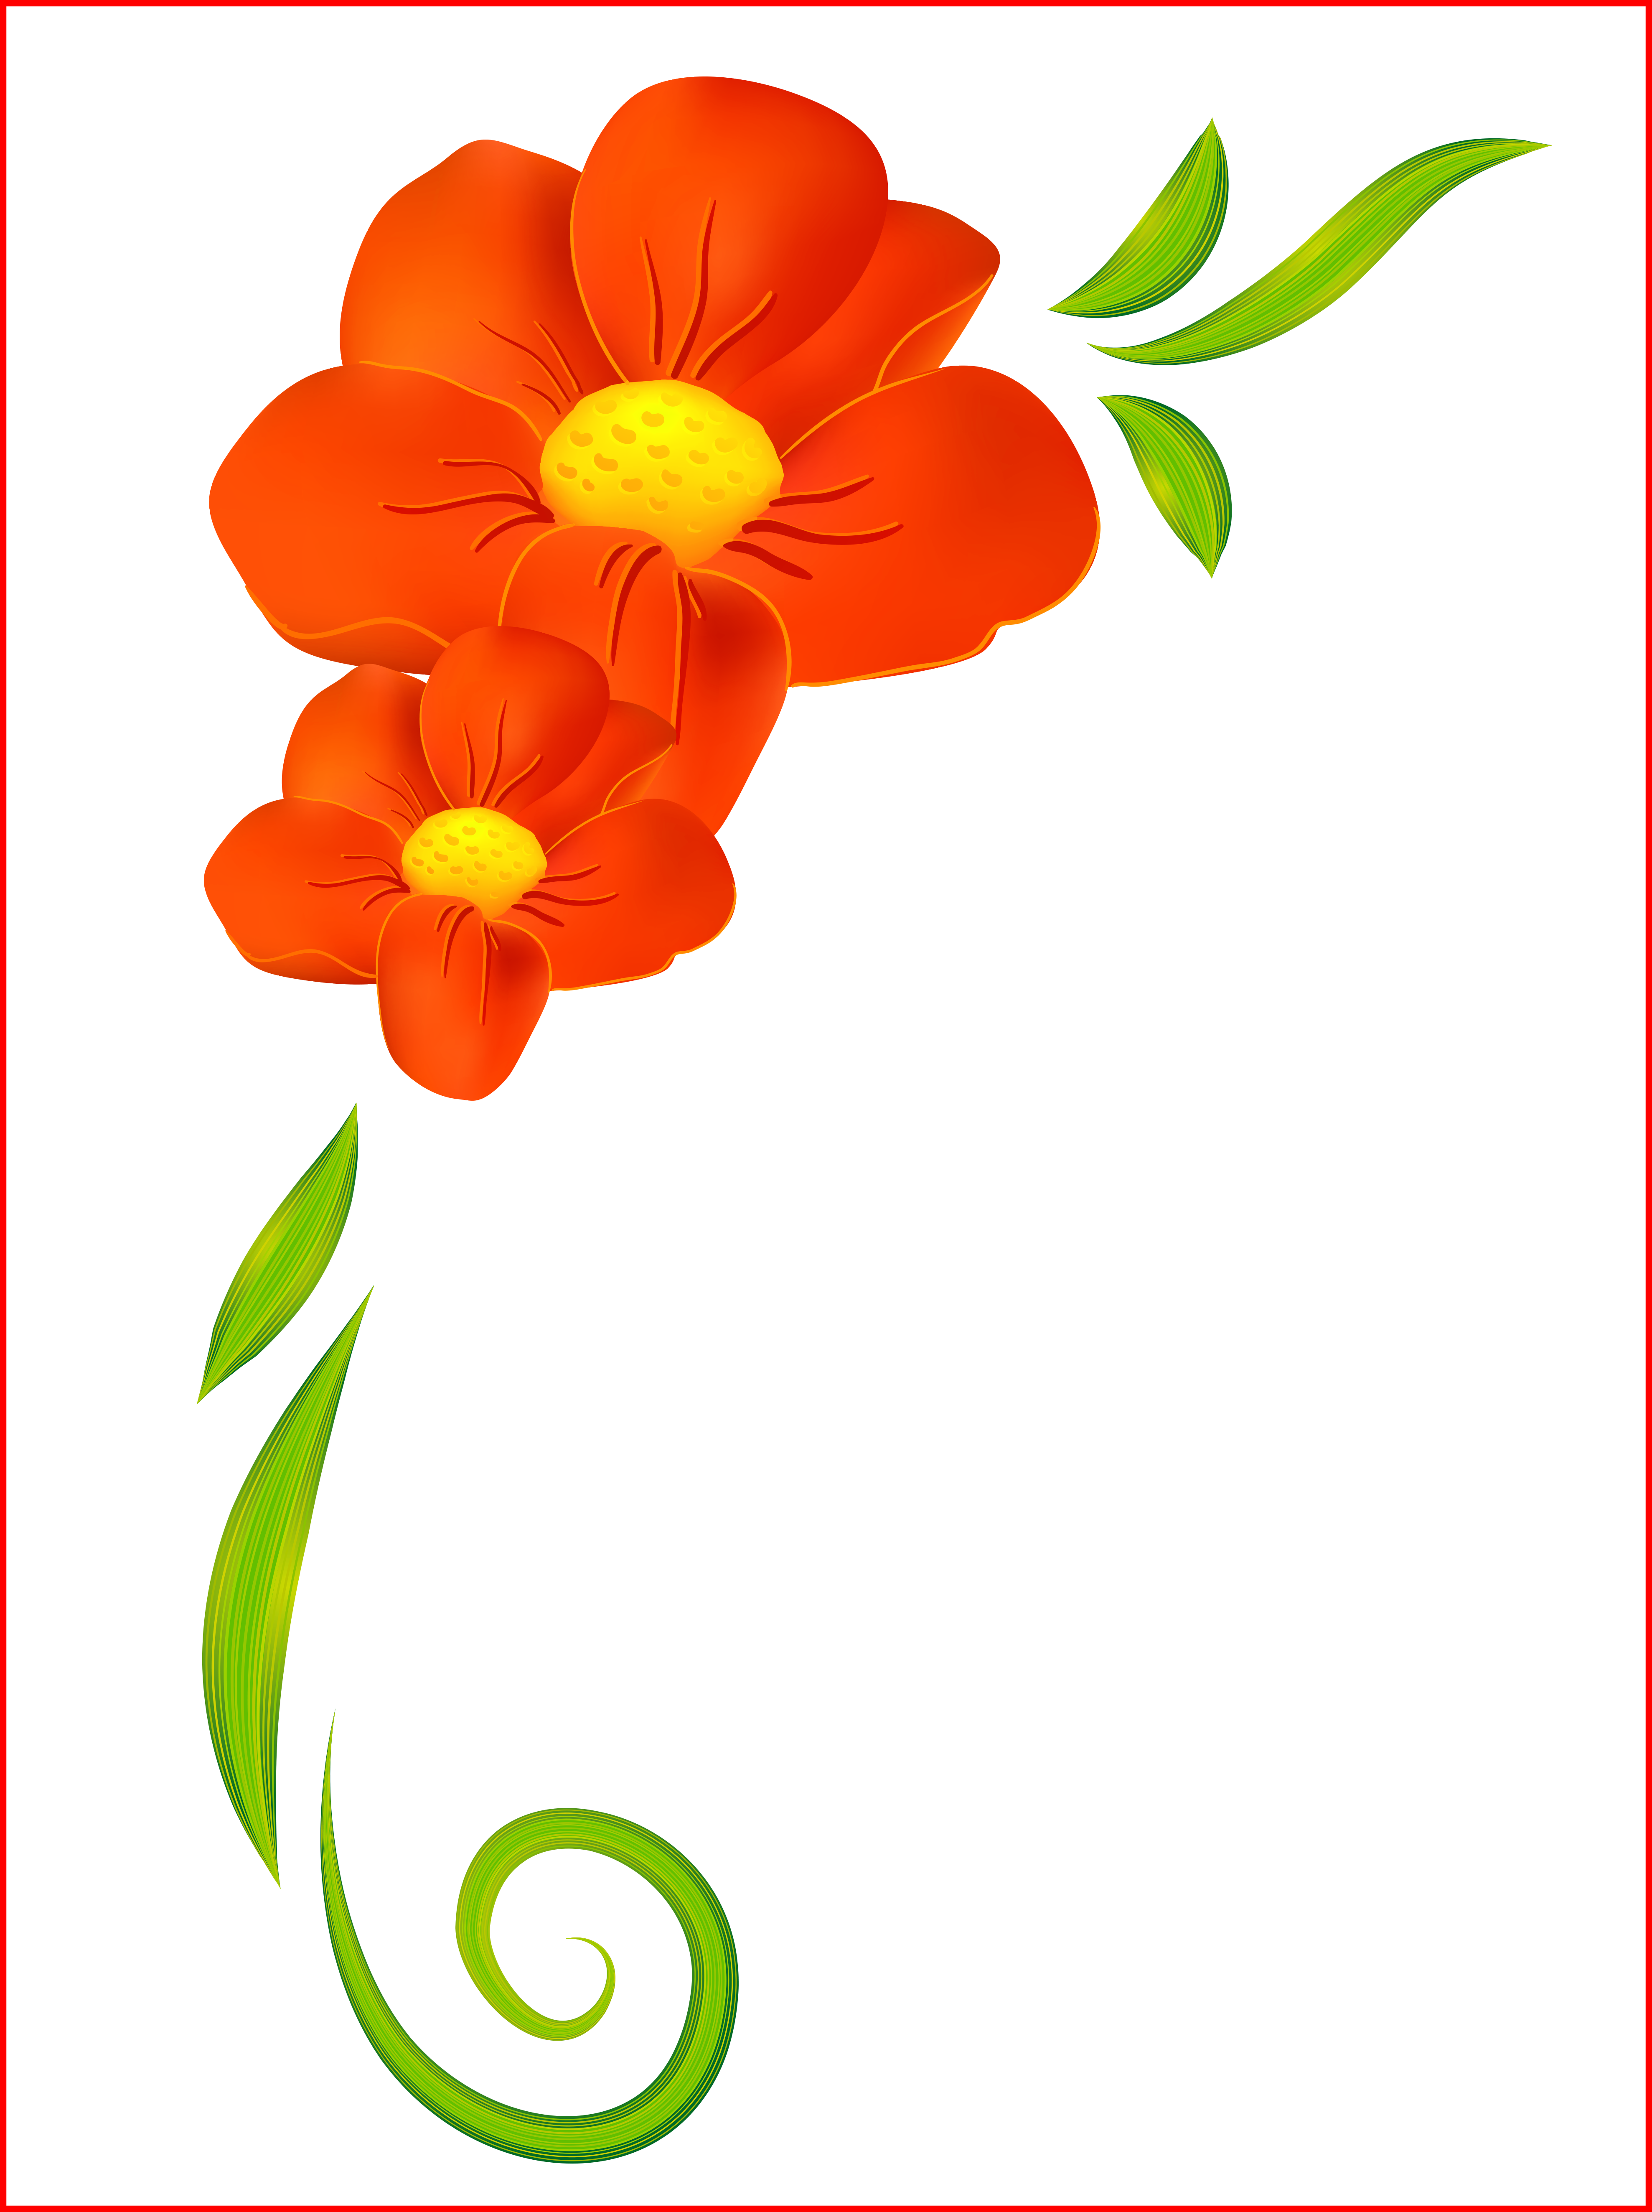 Marvelous Image Result For Clipart Spring Flowers Hd - Marvelous Image Result For Clipart Spring Flowers Hd (3954x5293)